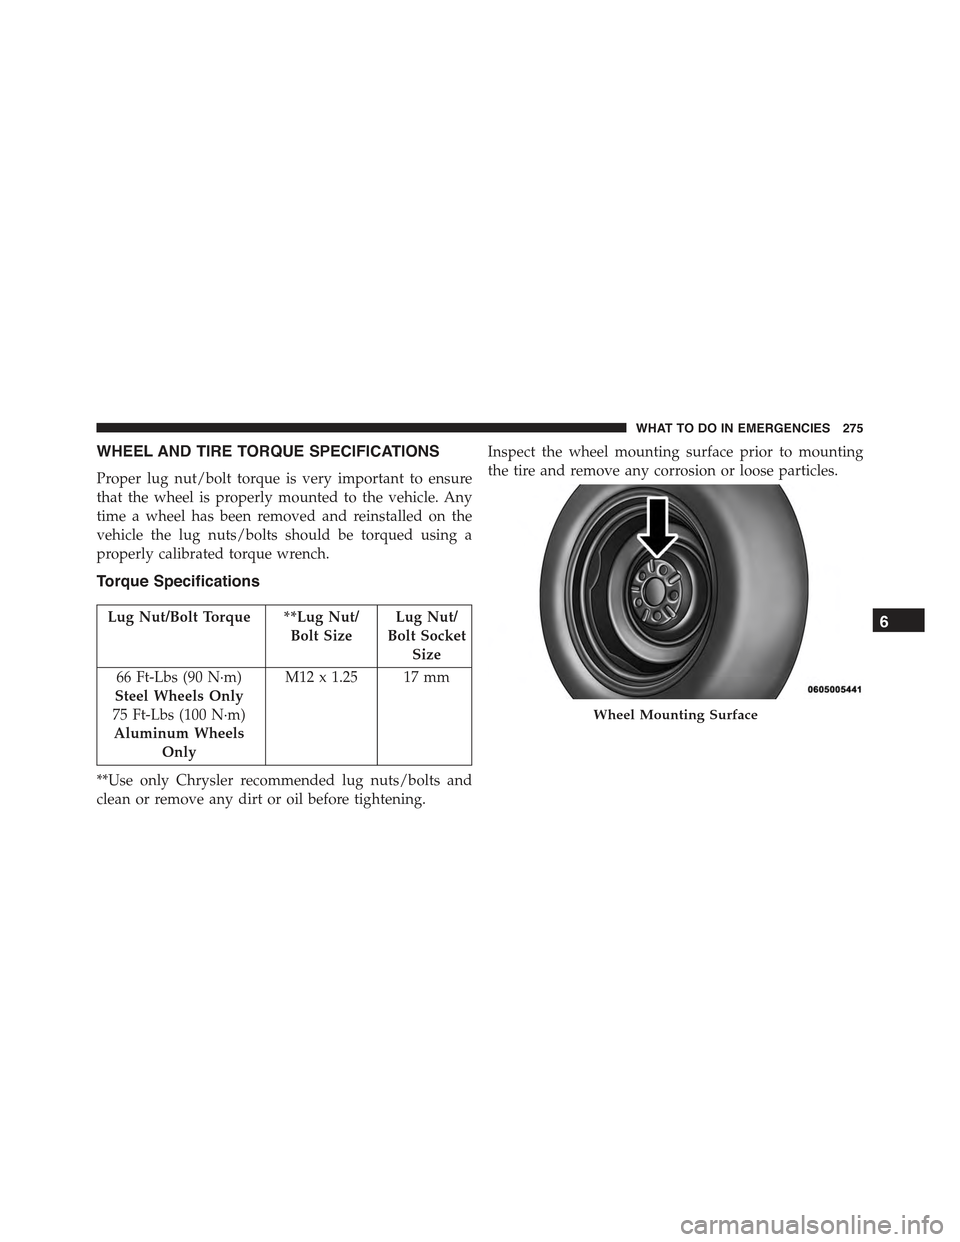 FIAT 500E 2015 2.G Service Manual WHEEL AND TIRE TORQUE SPECIFICATIONS
Proper lug nut/bolt torque is very important to ensure
that the wheel is properly mounted to the vehicle. Any
time a wheel has been removed and reinstalled on the
